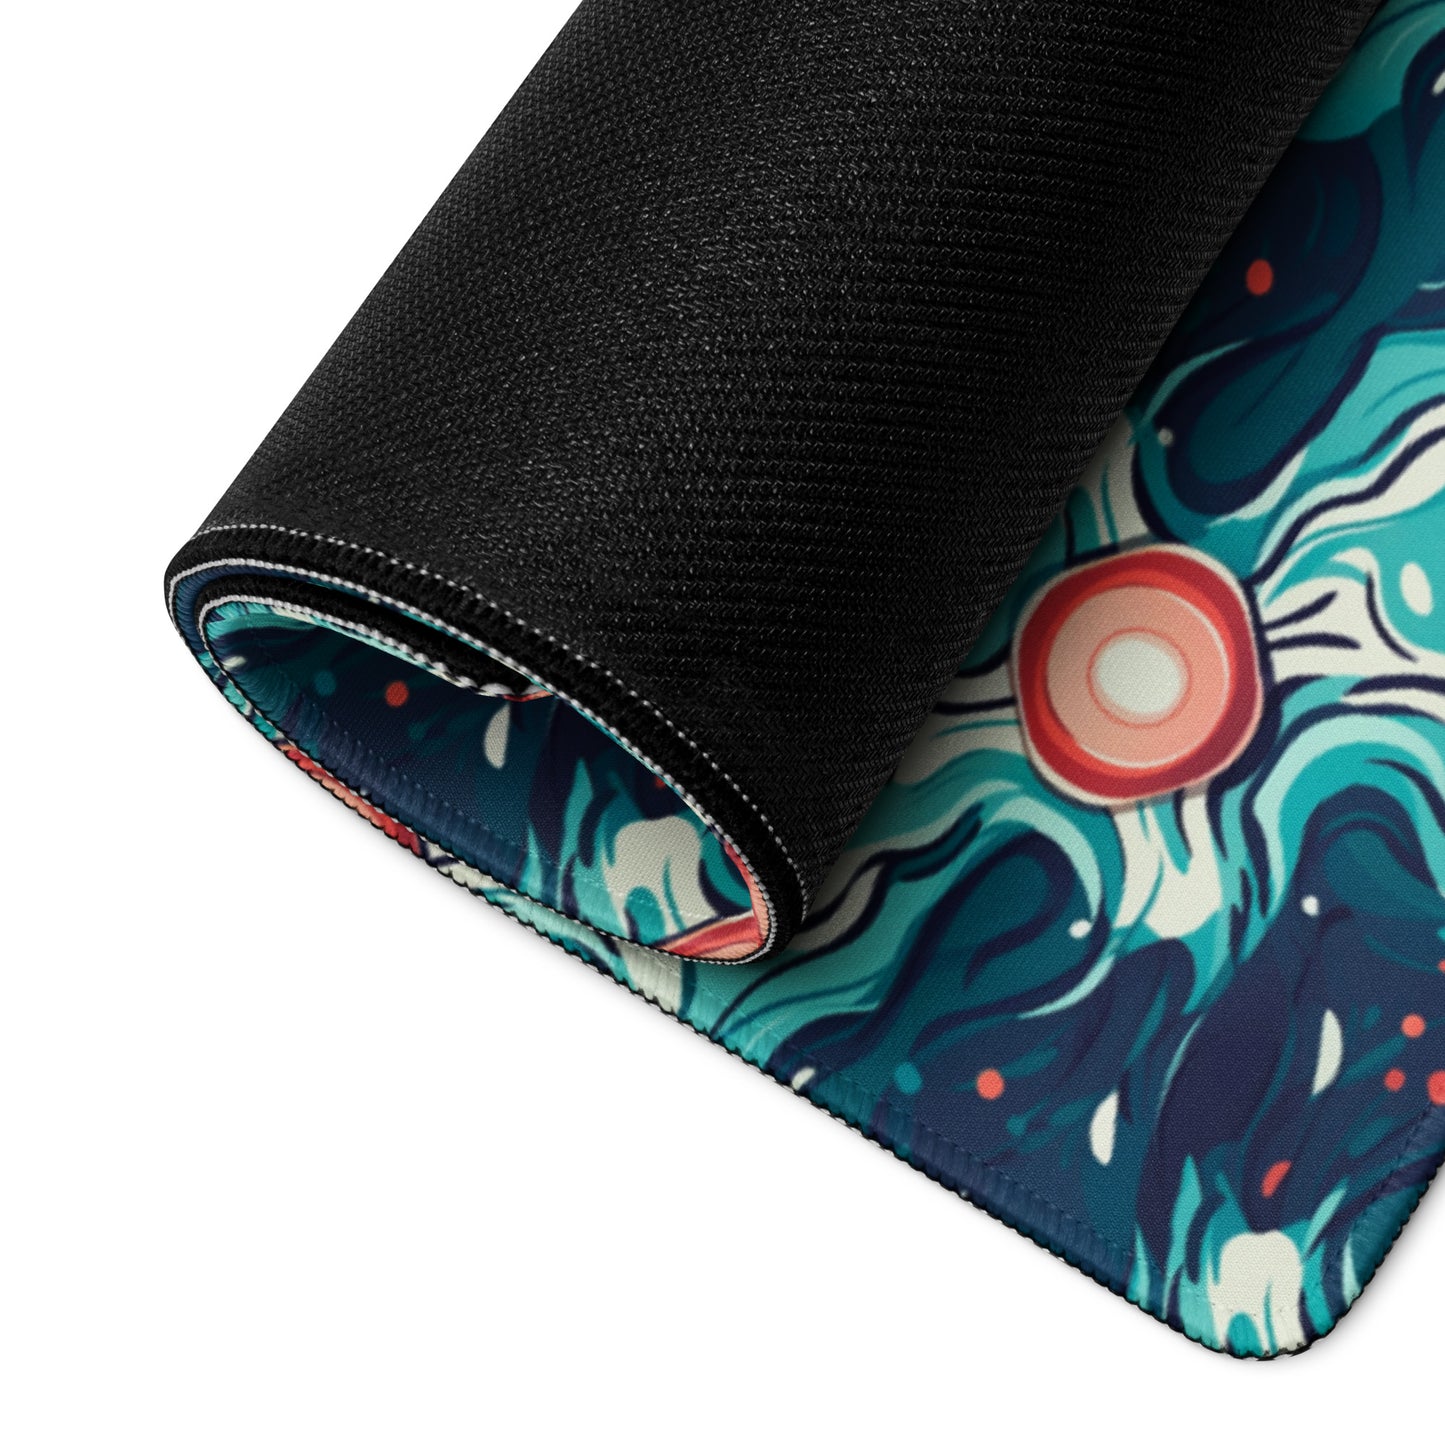 A 36" x 18" desk pad with a teal abstract wavy pattern rolled up.